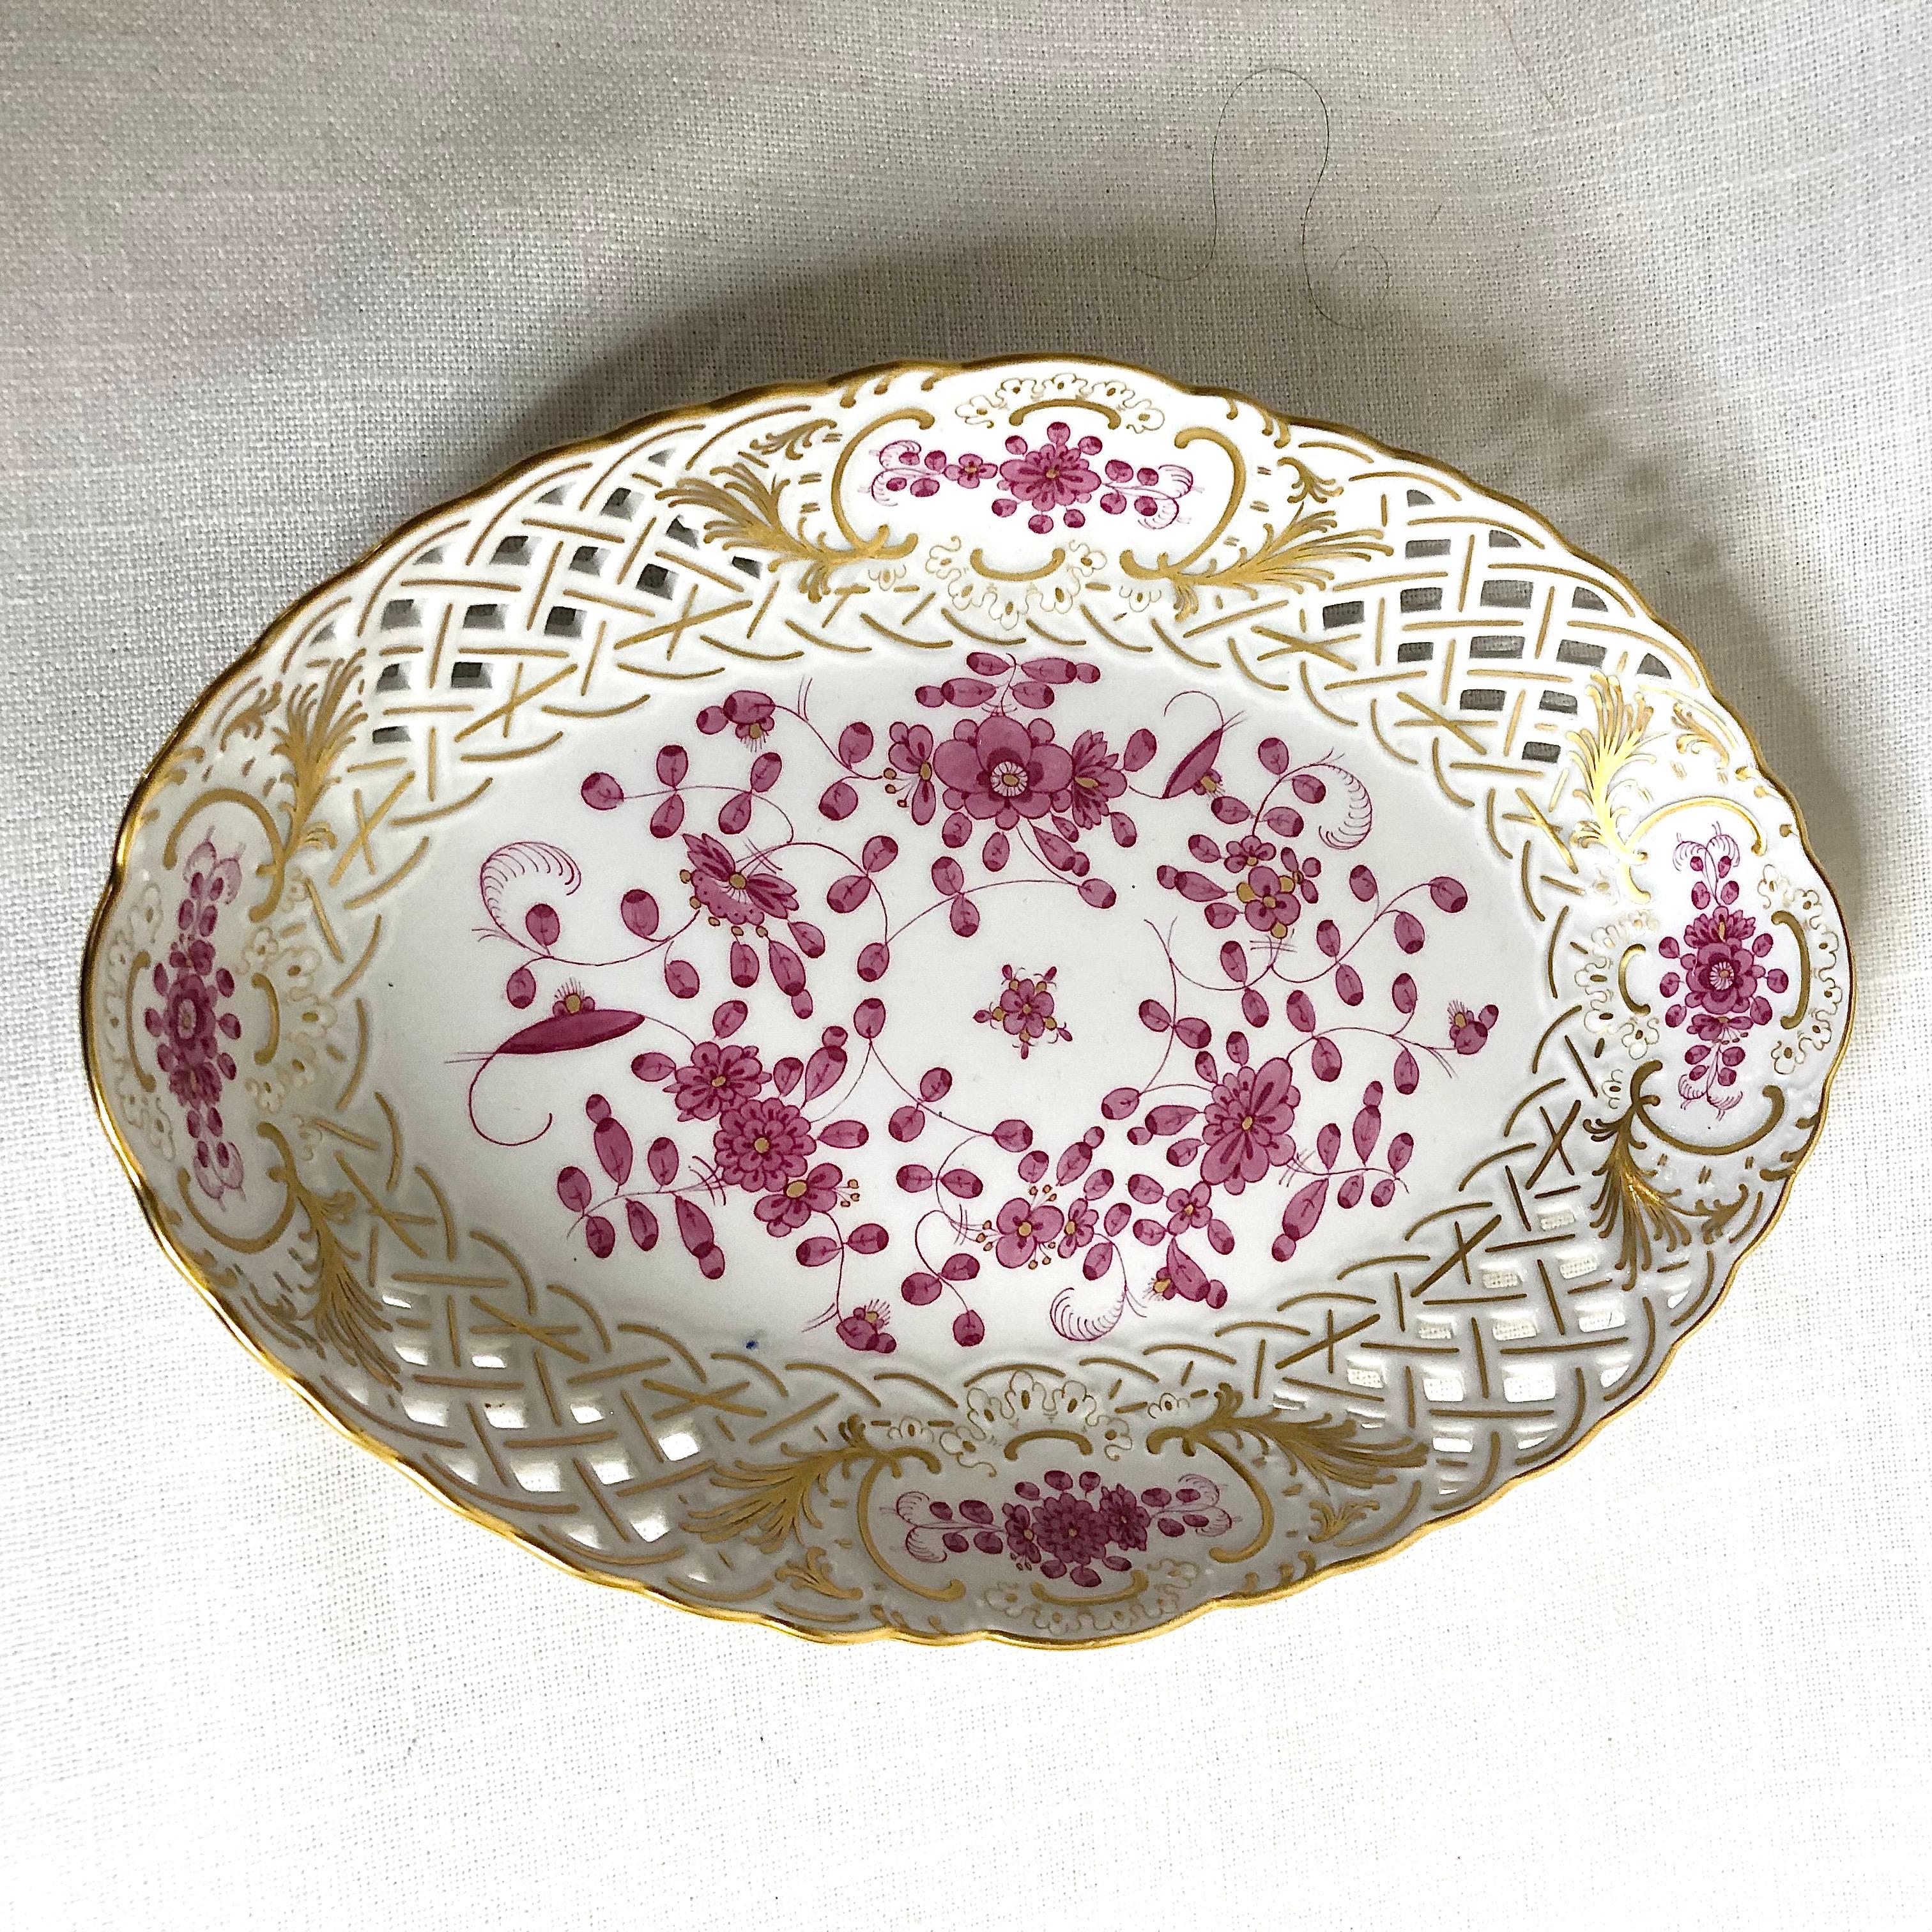 This is a beautiful Meissen purple Indian reticulated oval serving bowl. The purple Indian pattern of Meissen is one of my favorite patterns, as it has beautiful colors on a white porcelain ground. It is so cheerful and very eye catching. This